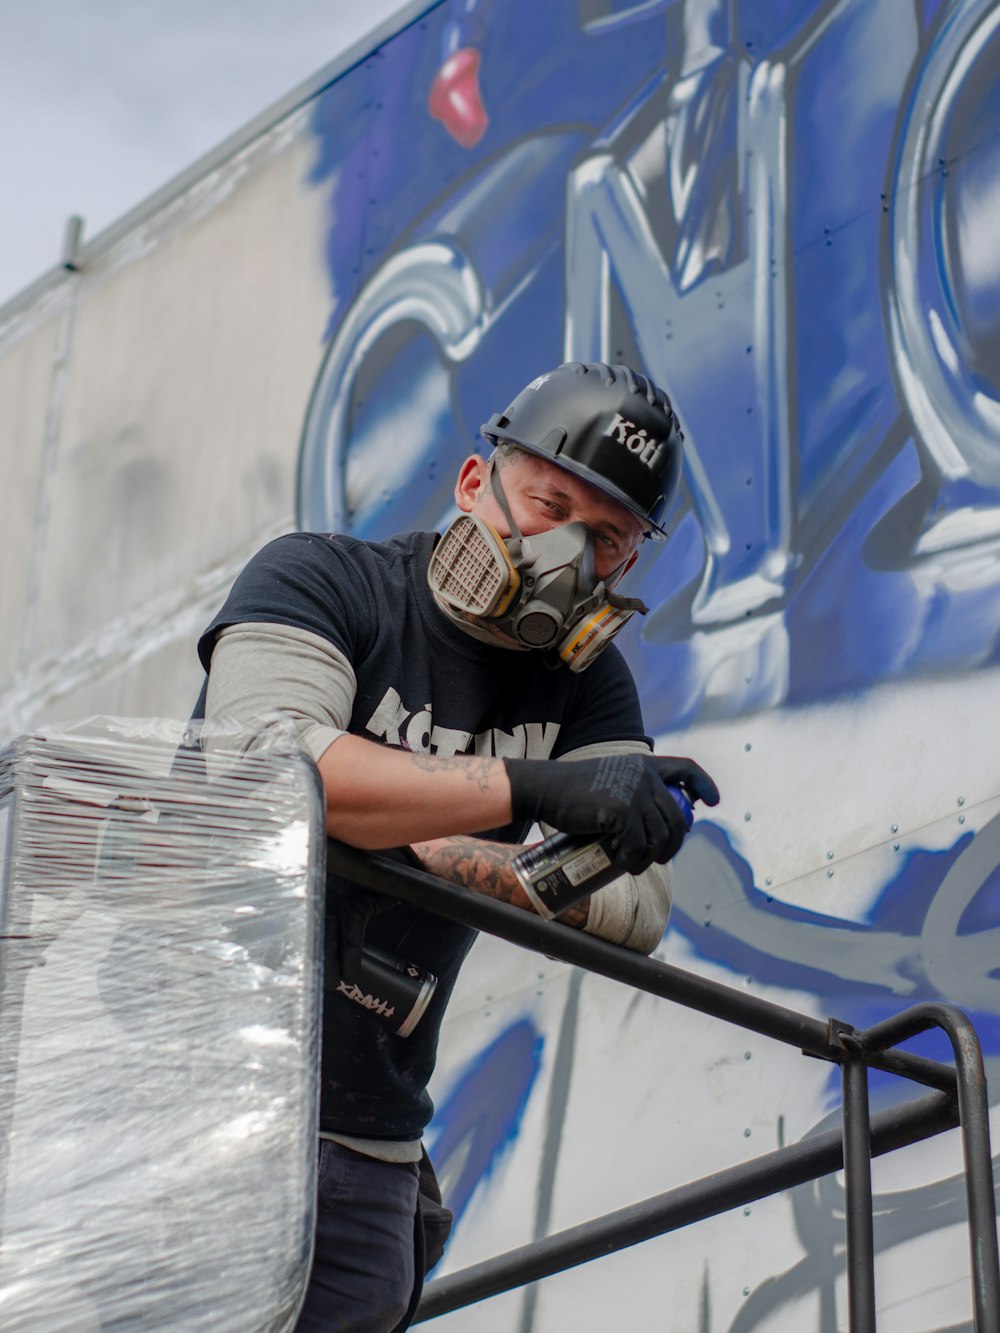 a man in a helmet and protective gear painting a wall